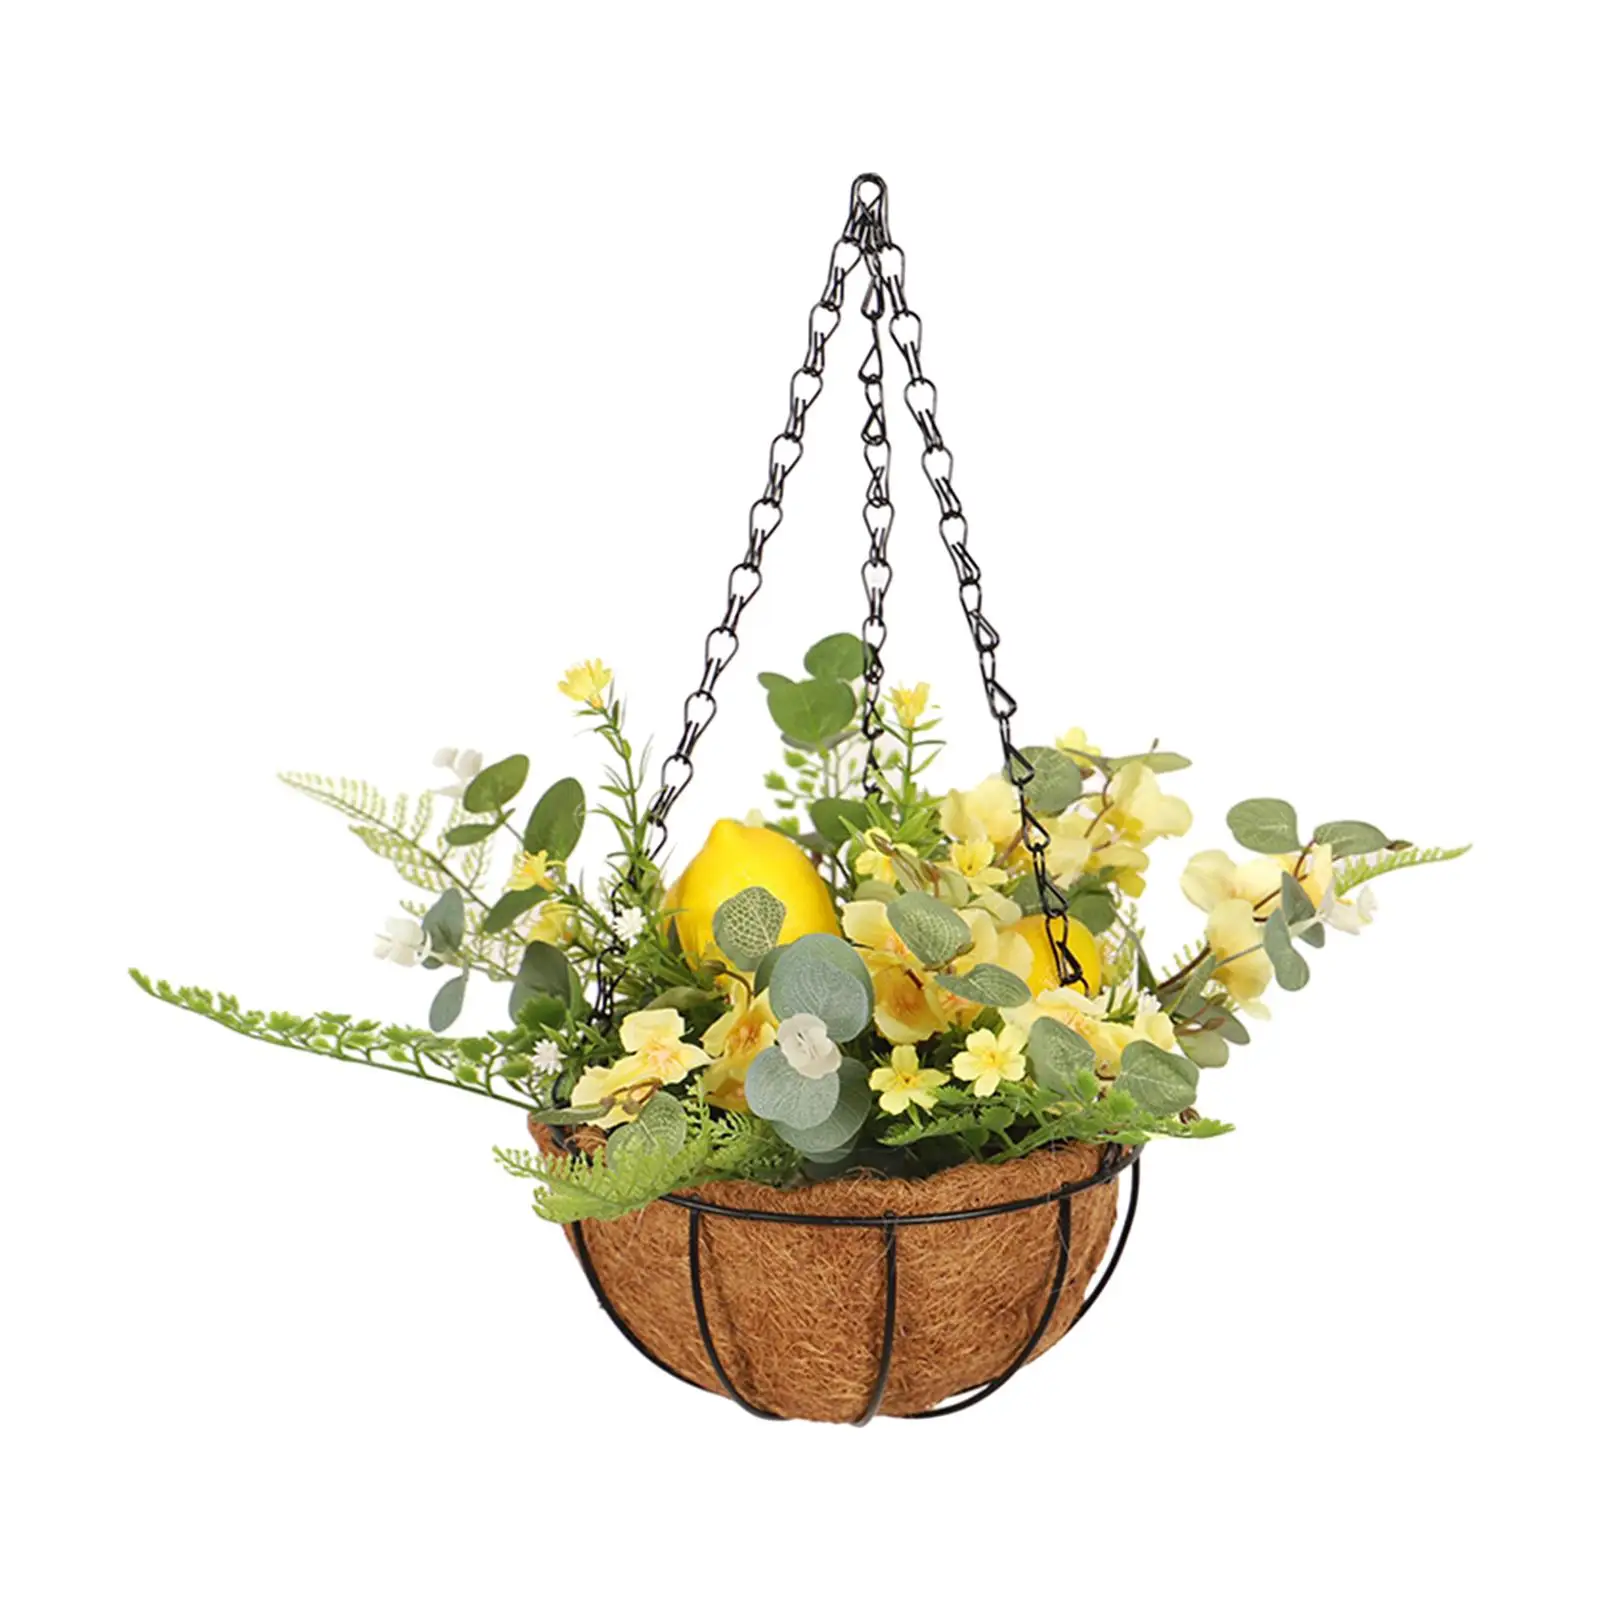 Artificial Flowers Basket Ornament Fake Hanging Plant for Patio Porch Yard